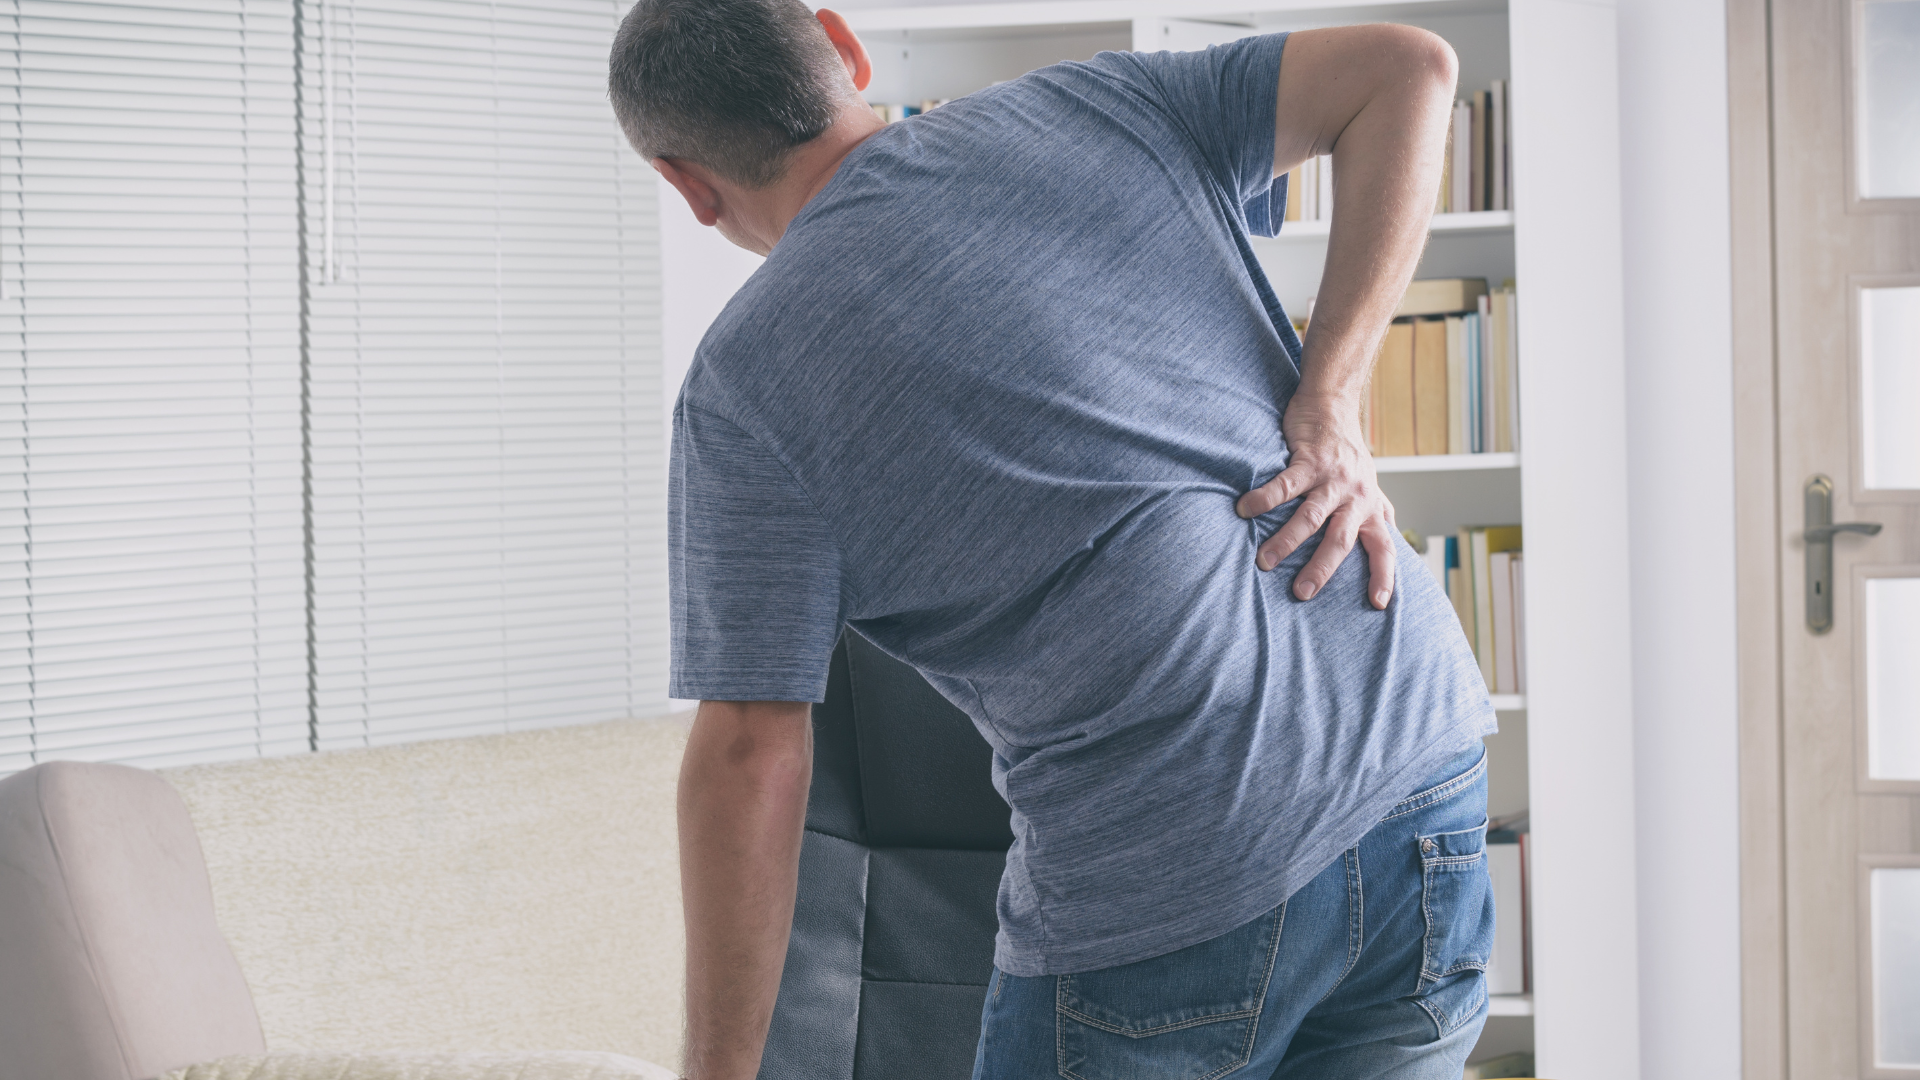 Man experiencing back pain